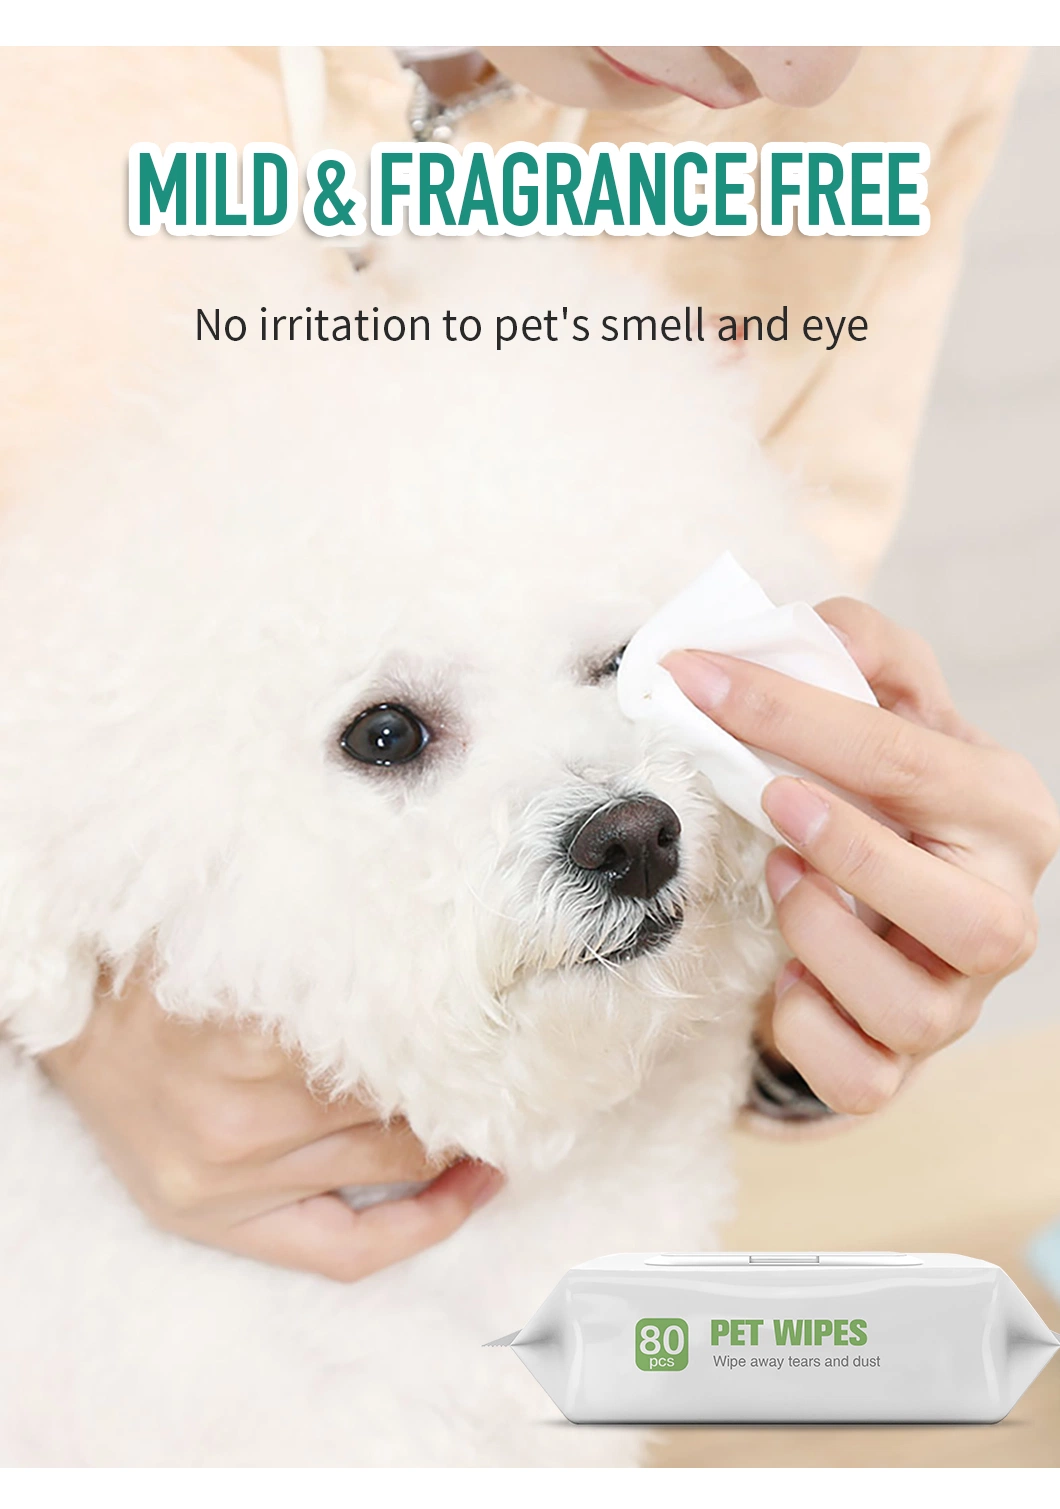 Unscented and Alcohol Free Pet Wipes for Paws and Butt